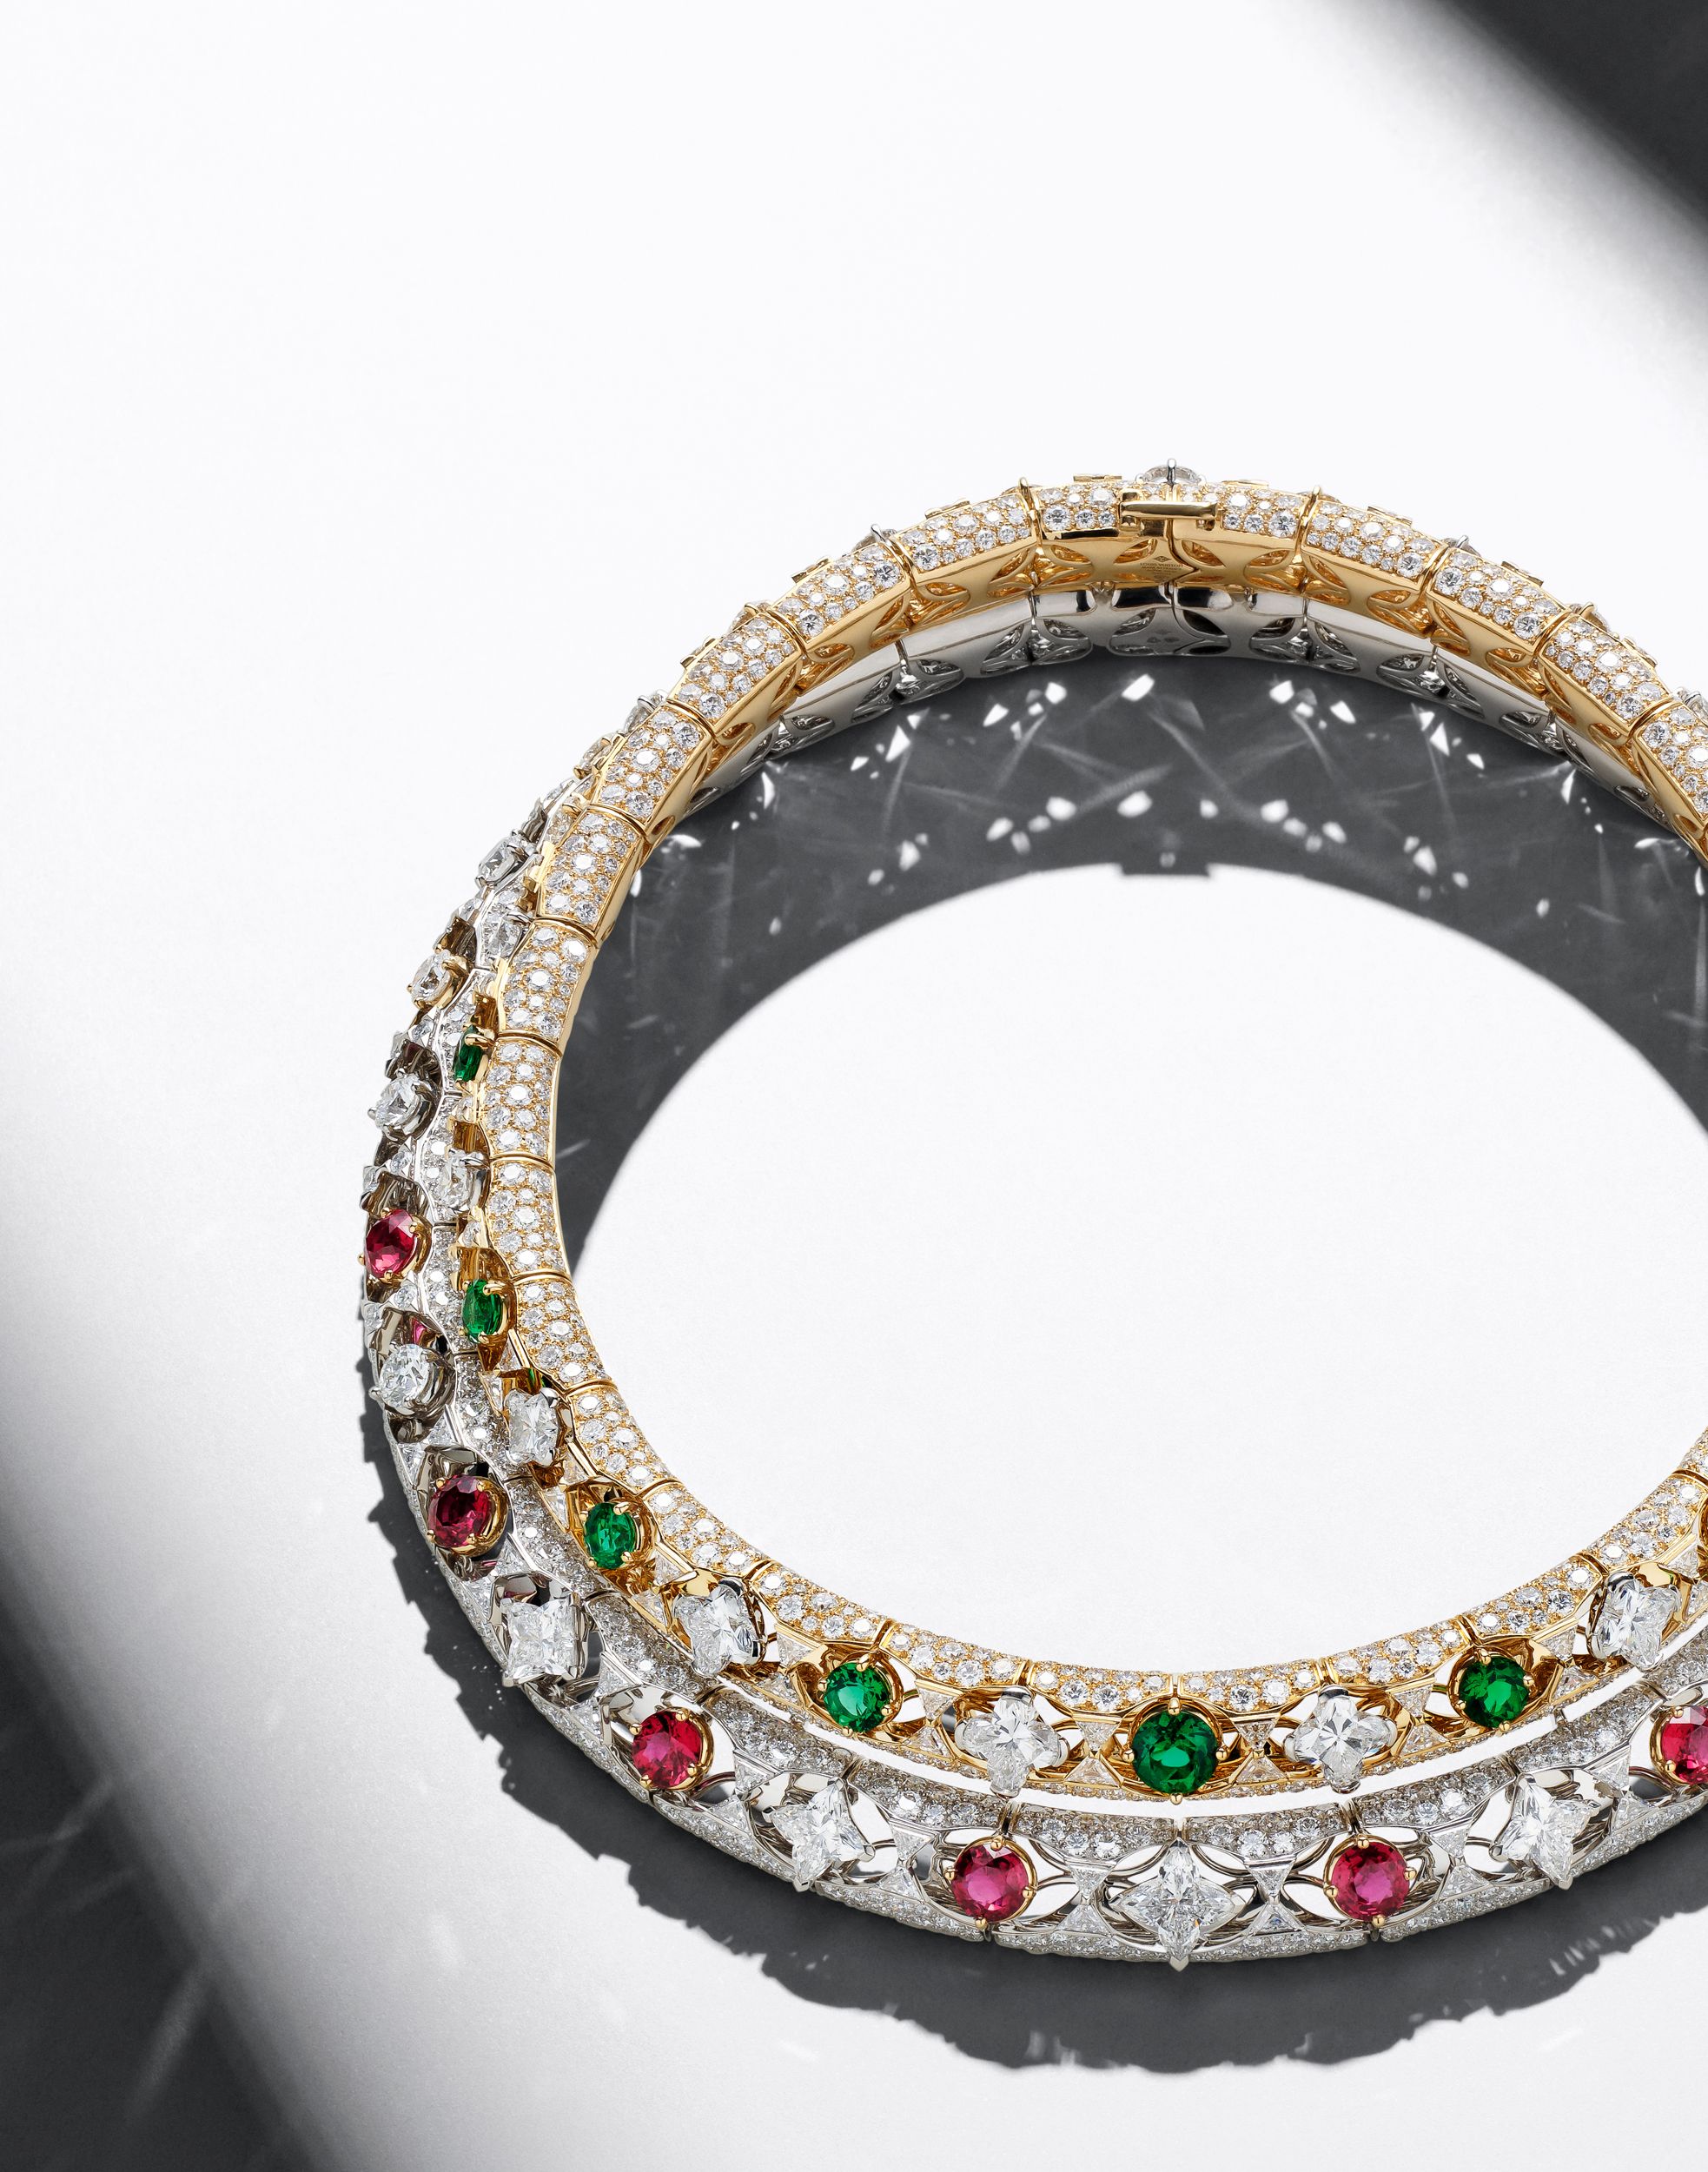 Louis Vuitton's 2019 High Jewelry Collection Was Inspired by Joan